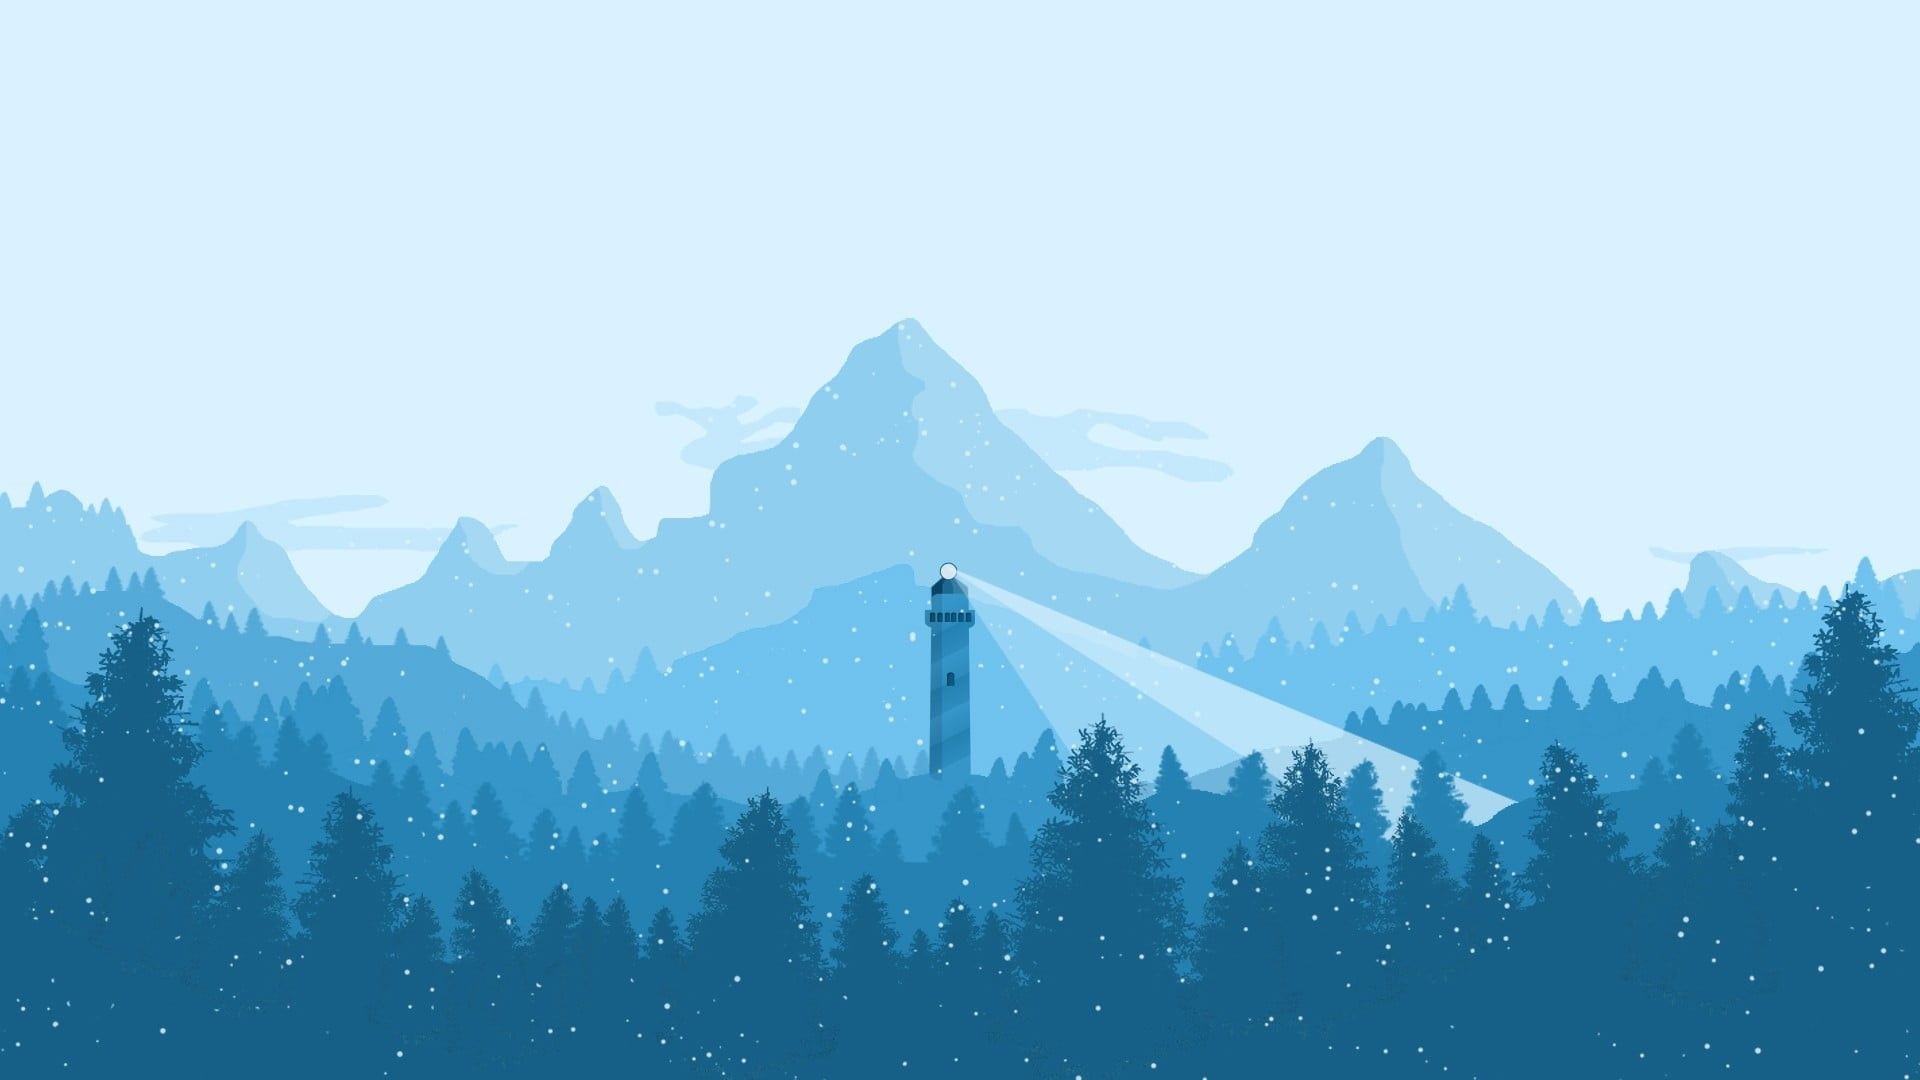 A blue and white lighthouse in a snowy forest with mountains in the background - Mountain